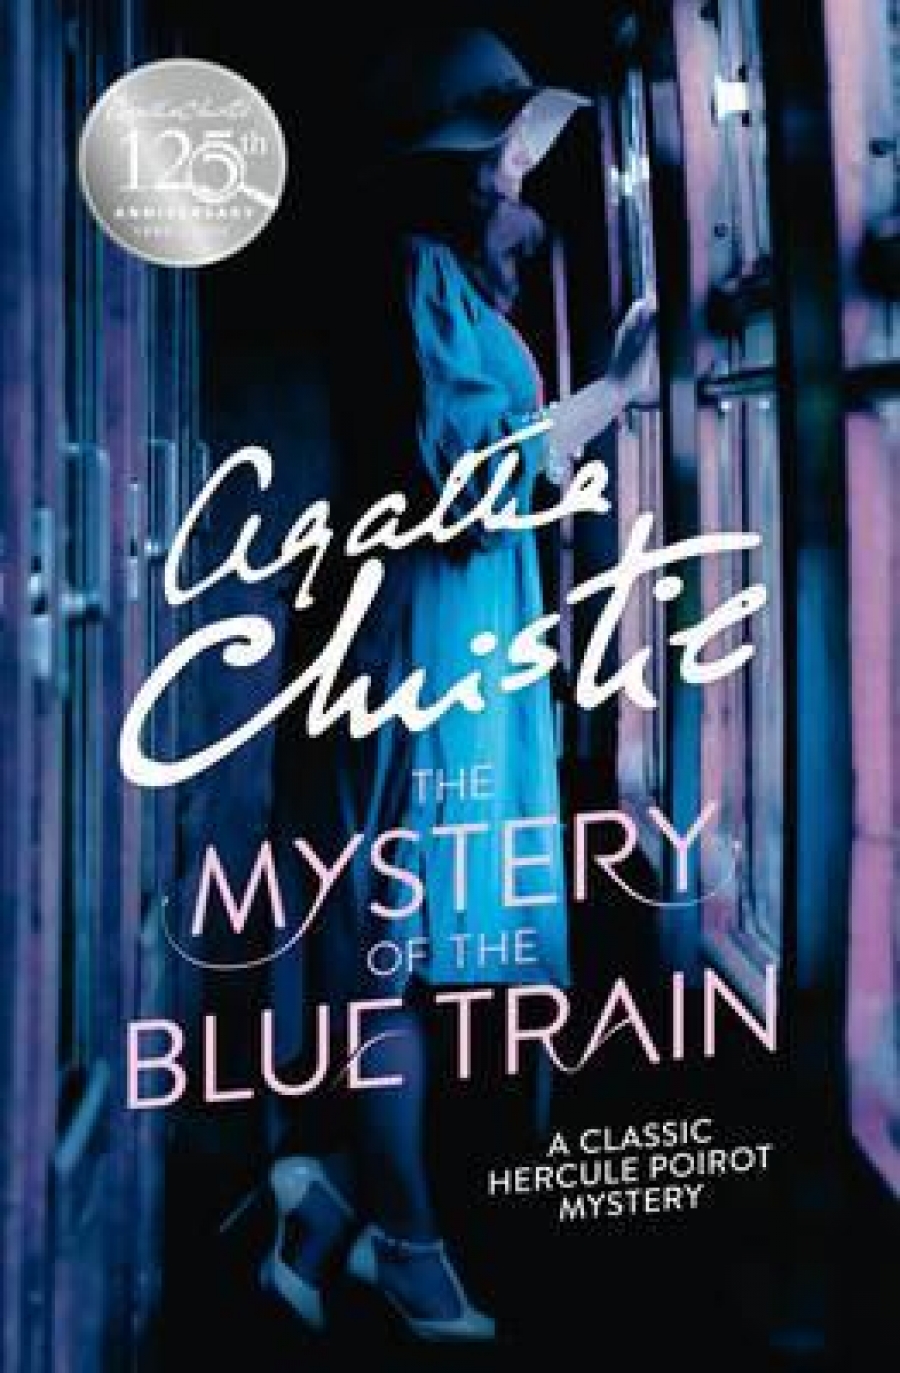 Christie Agatha Poirot - the Mystery of the Blue Train 